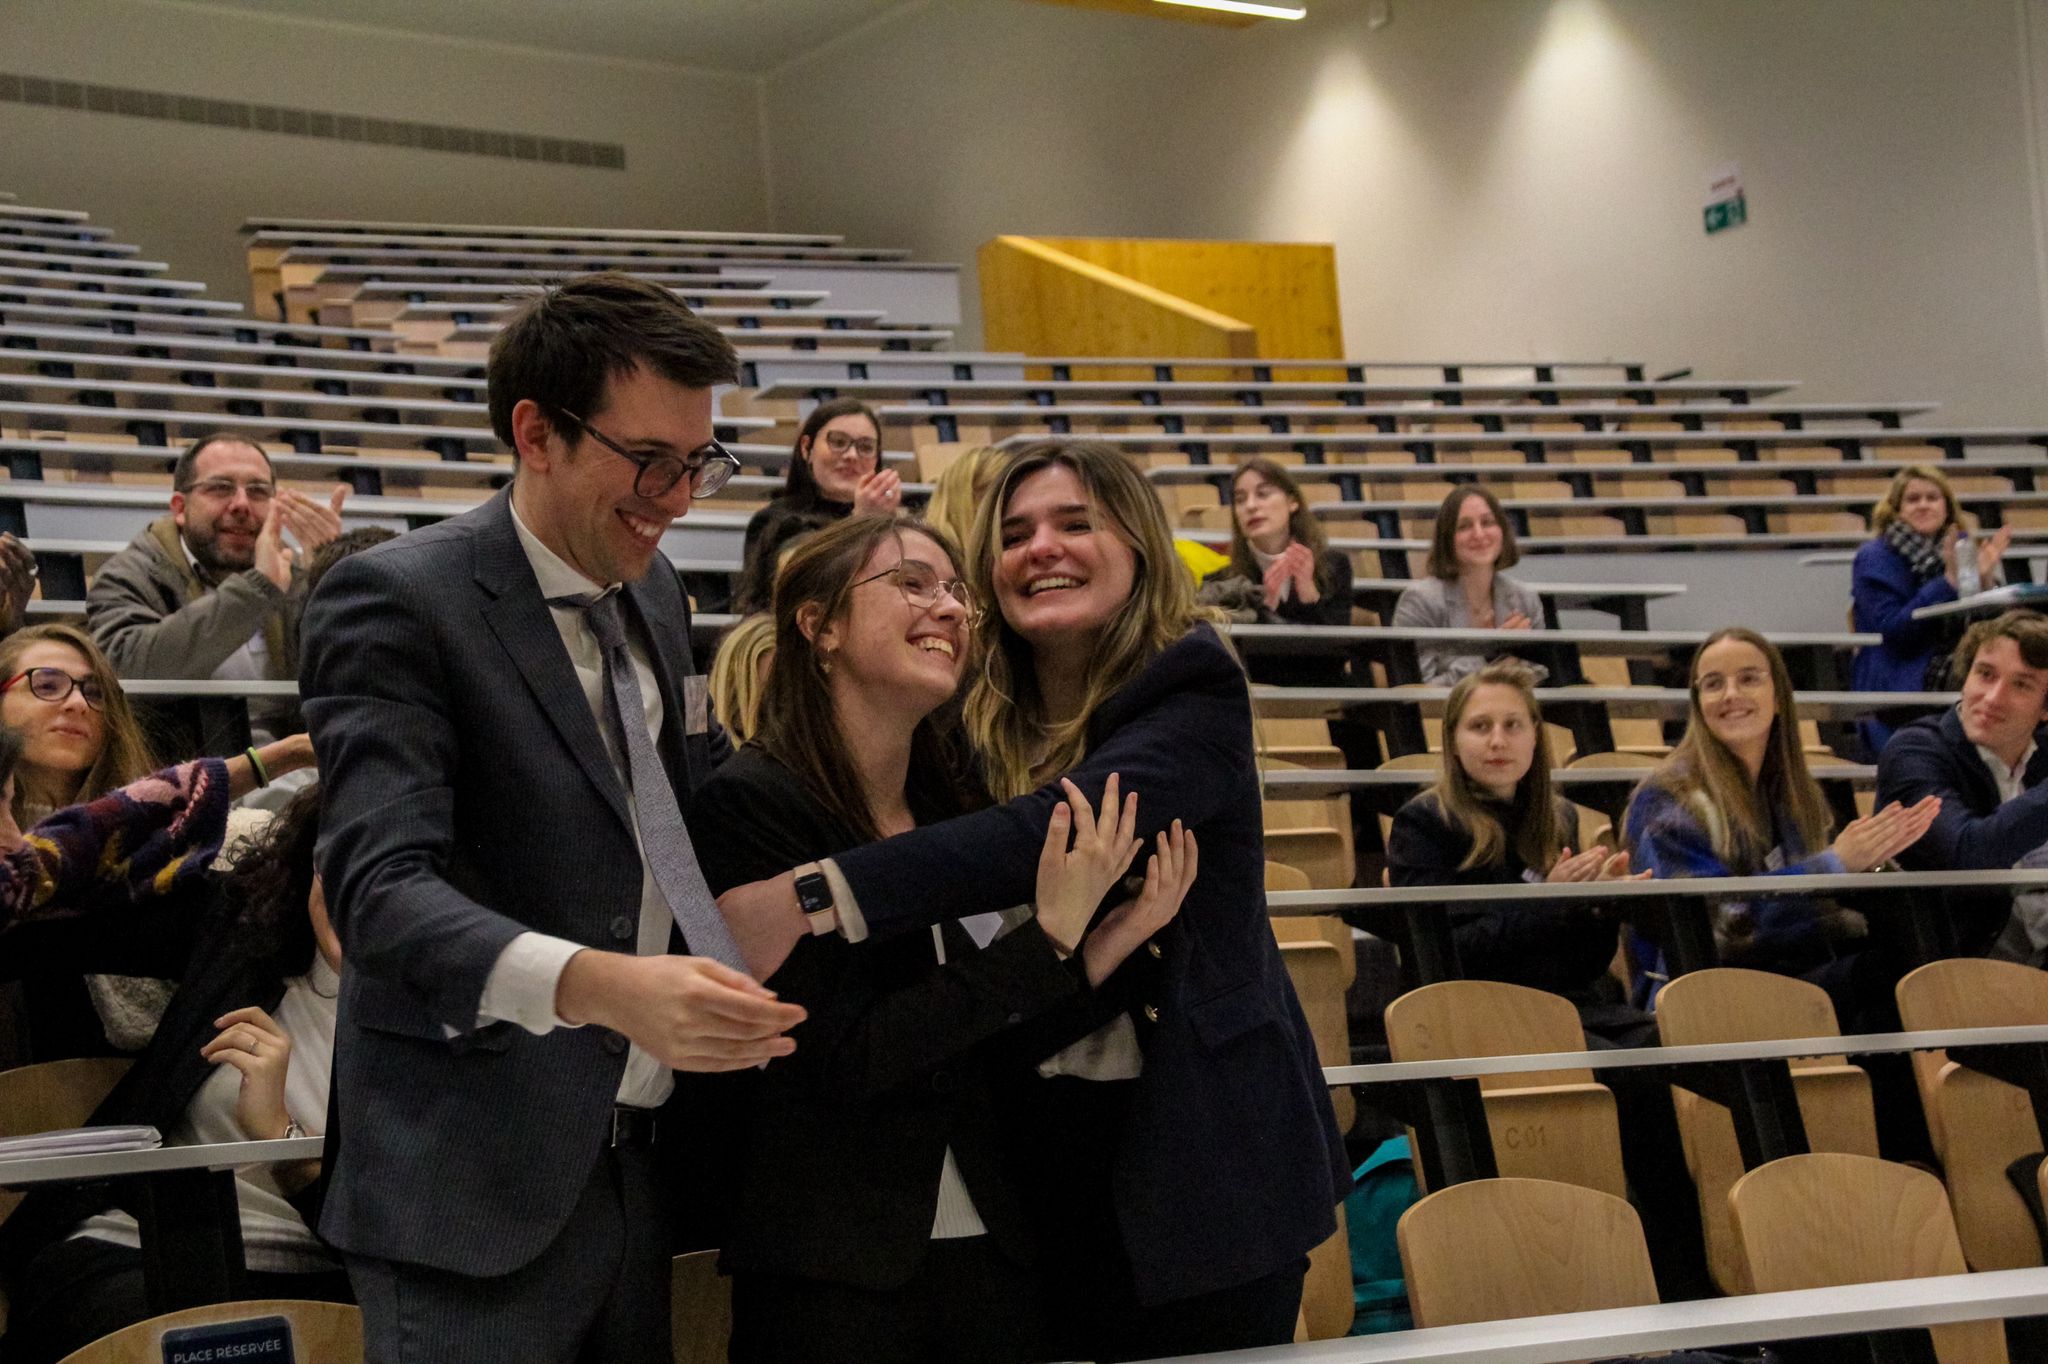 Moot Court Competition on the European Social Charter